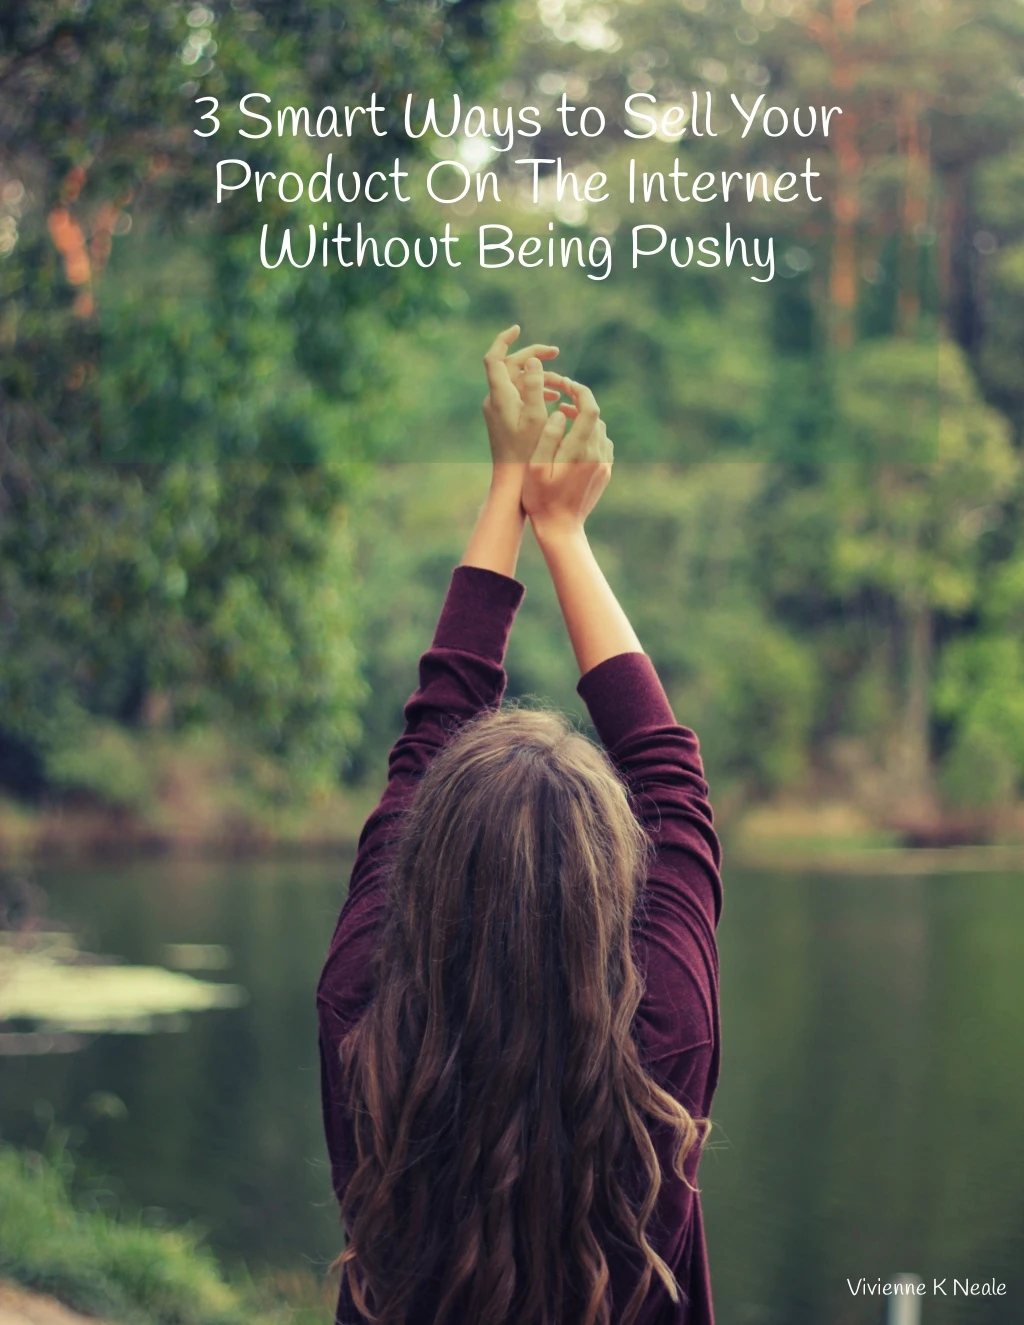 3 smart ways to sell your product on the internet